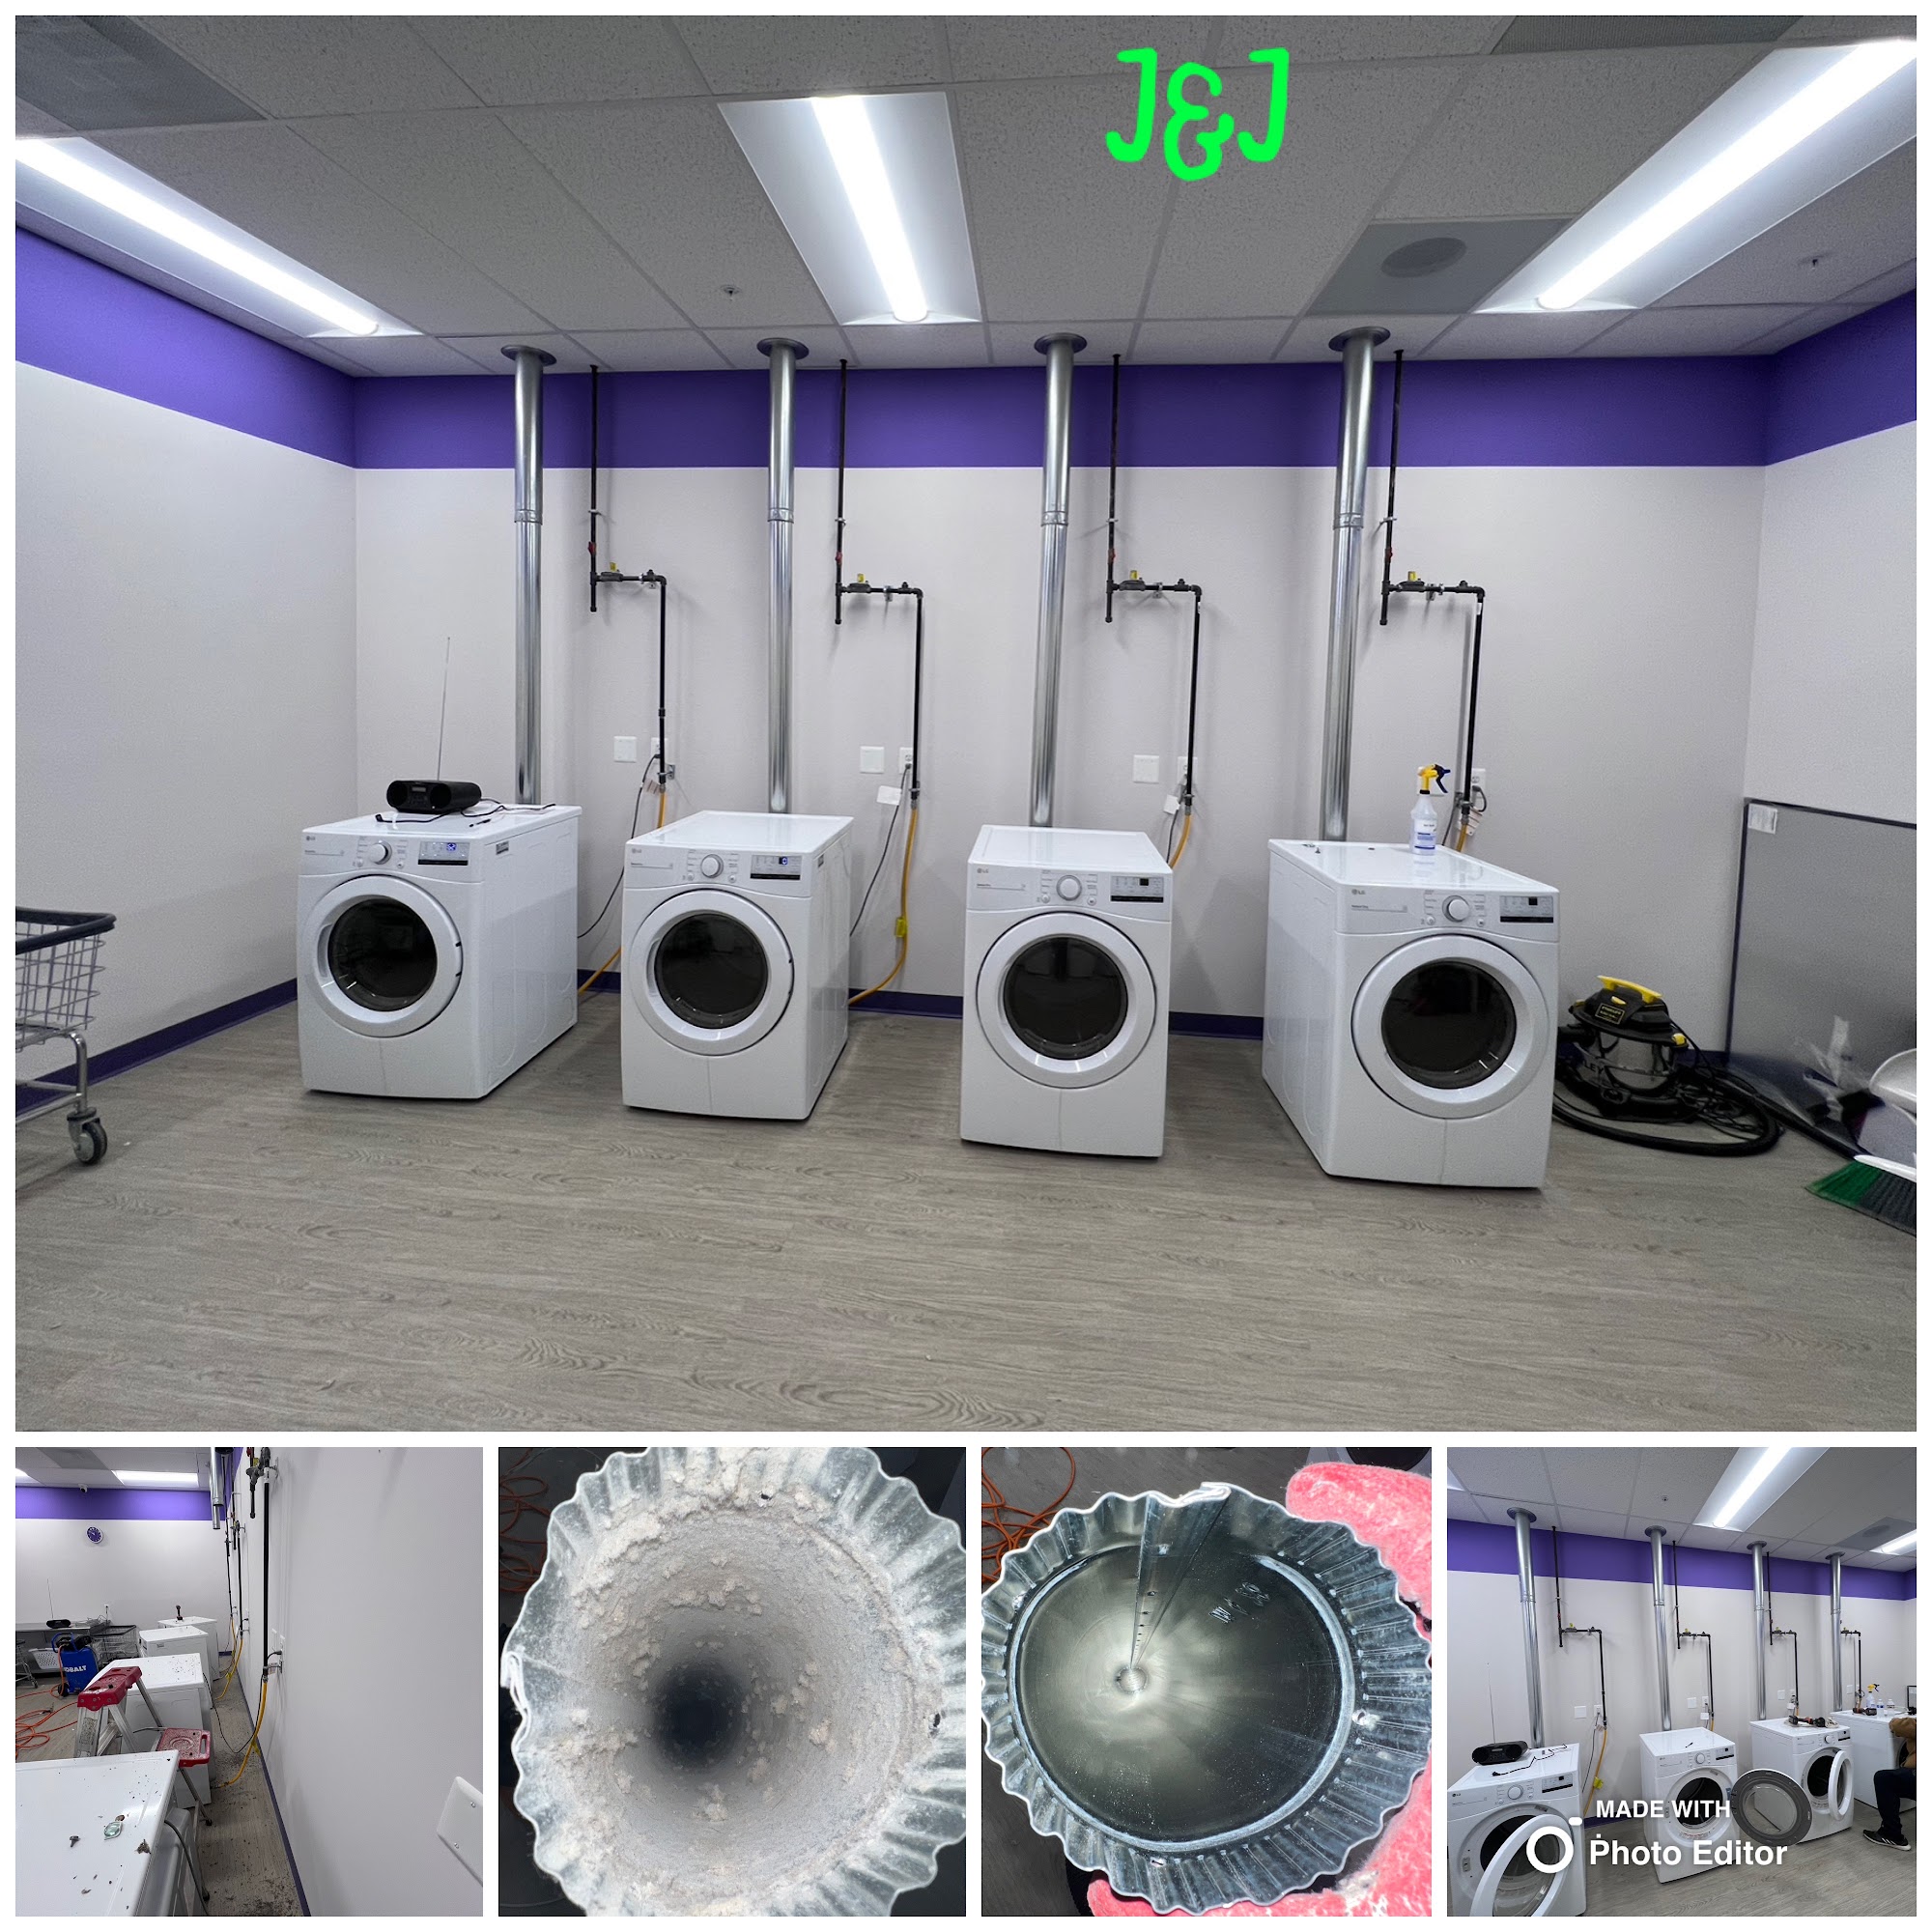 J&J Duct Cleaning, Installation, Repair and House Cleaning